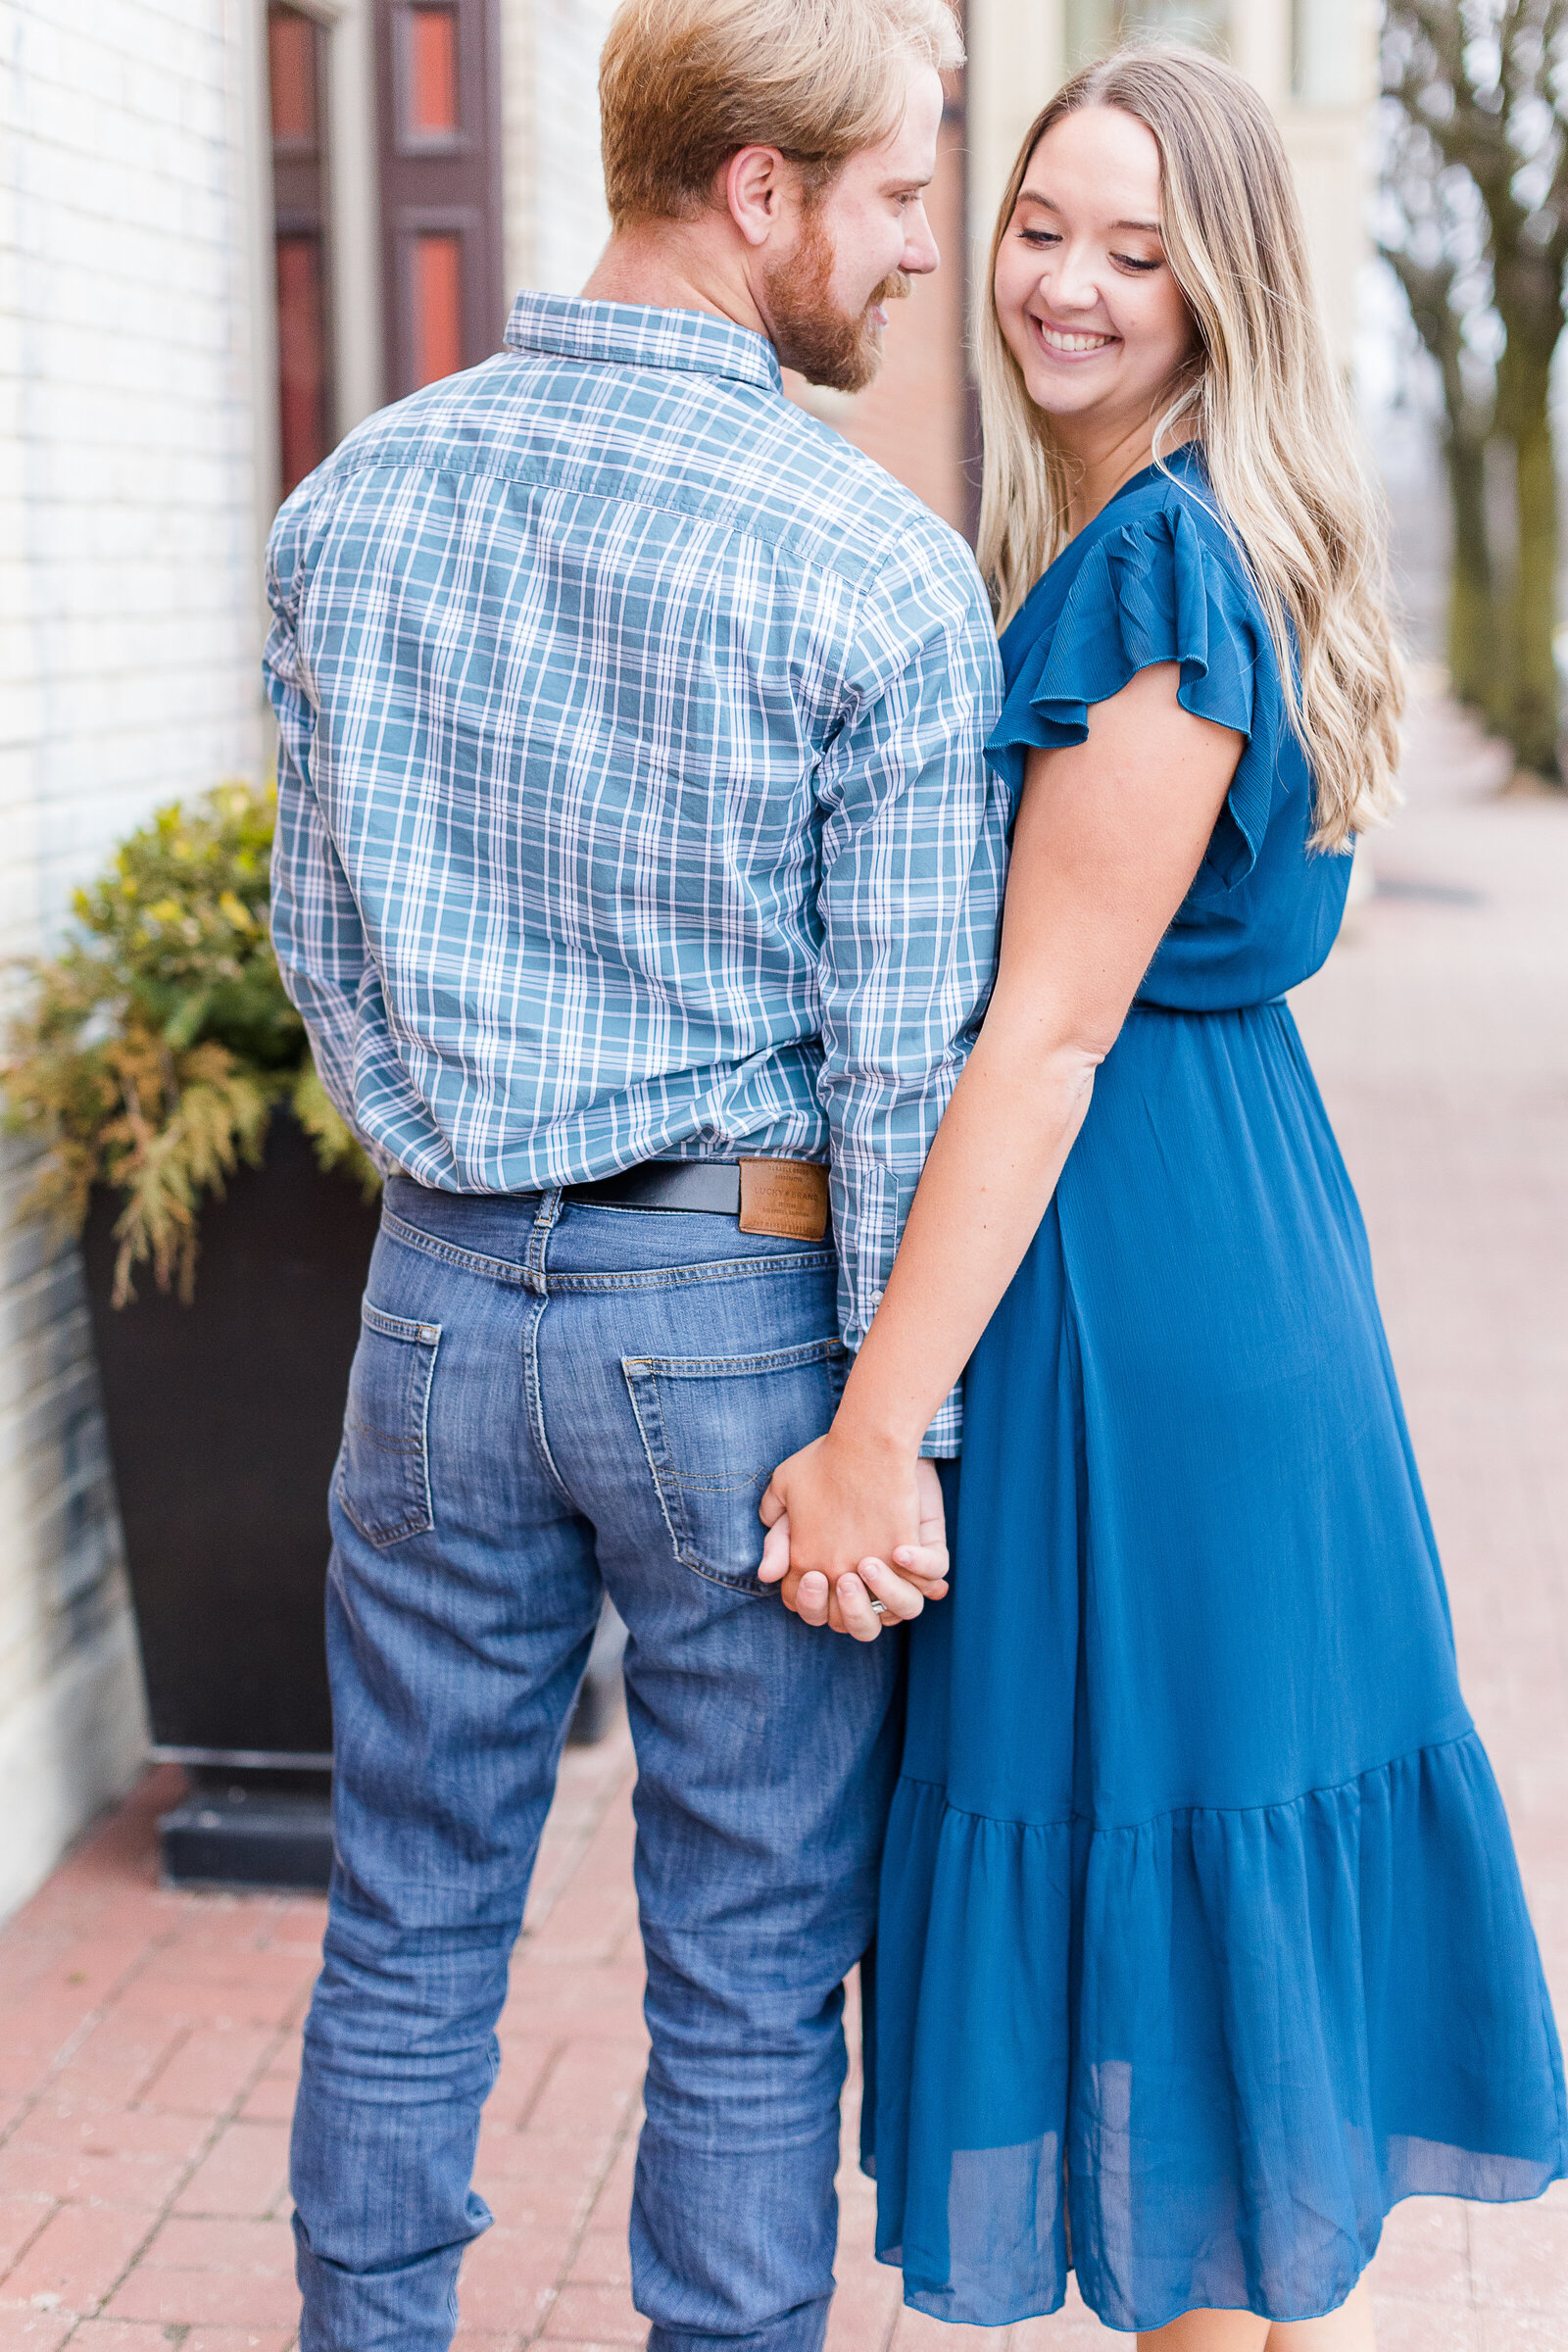 Engagement photos in downtown Hermann MO